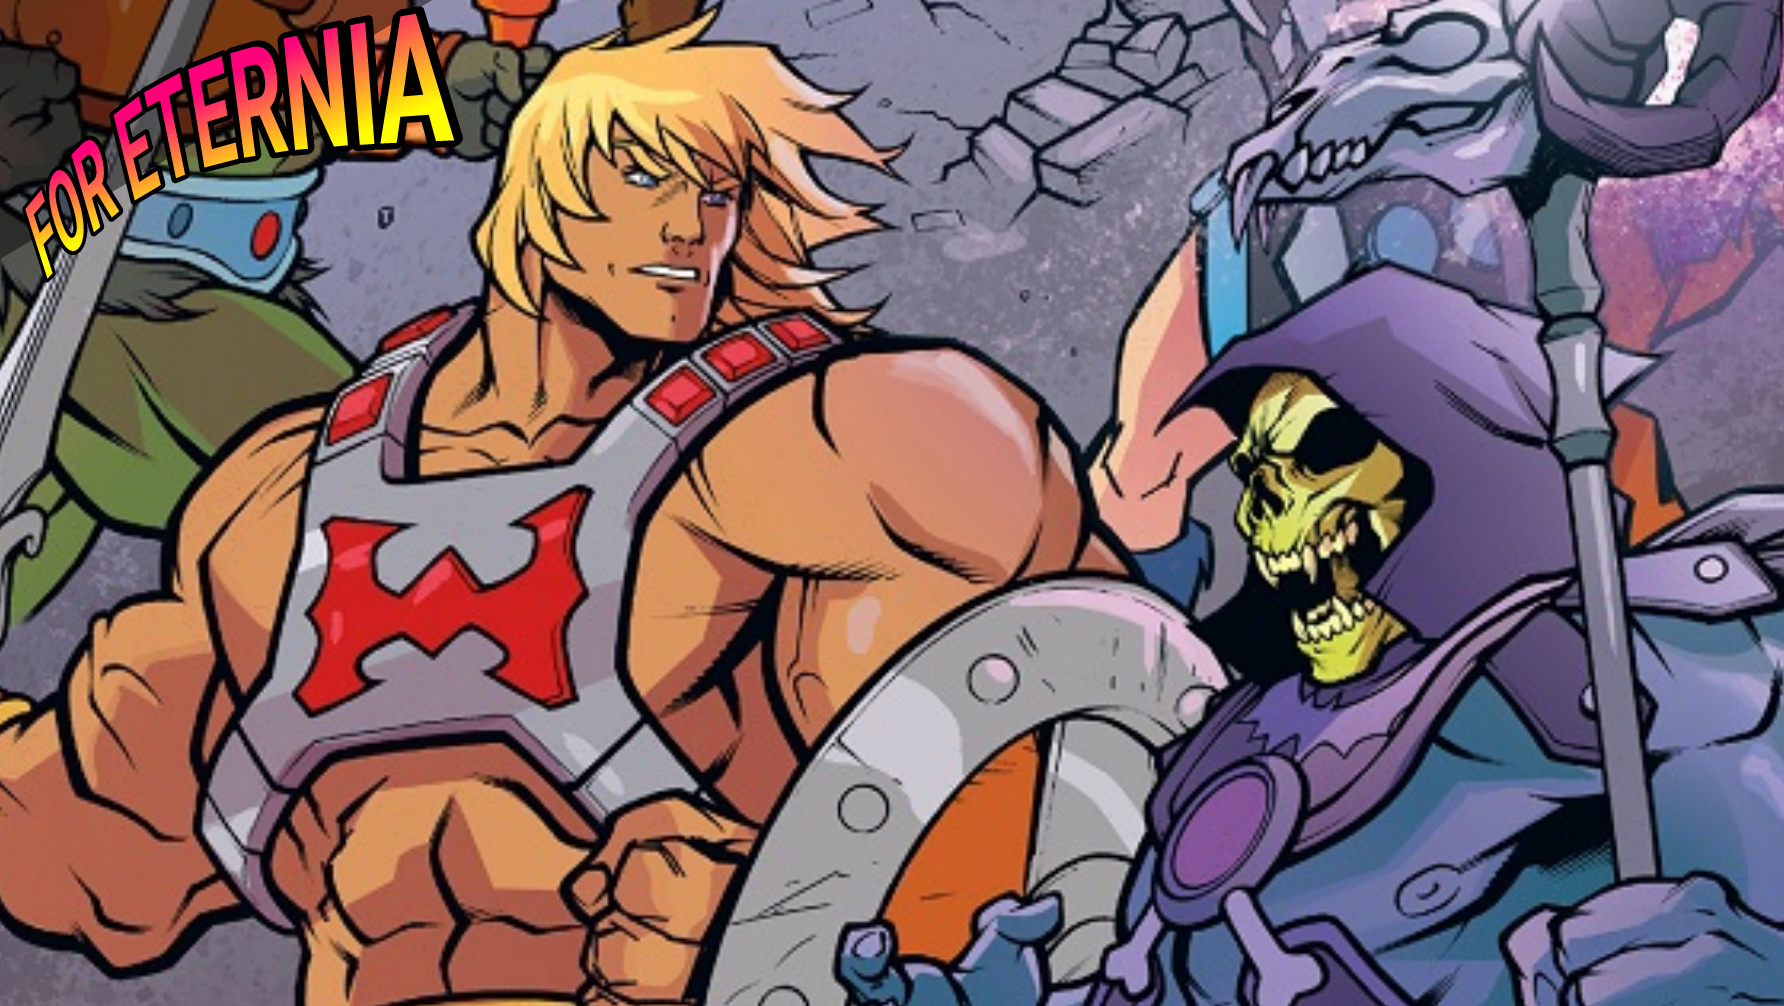 Five Page Preview of Dark Horse Comics ”Masters of the Universe: Forge of Destiny ” Issue #1 is Released